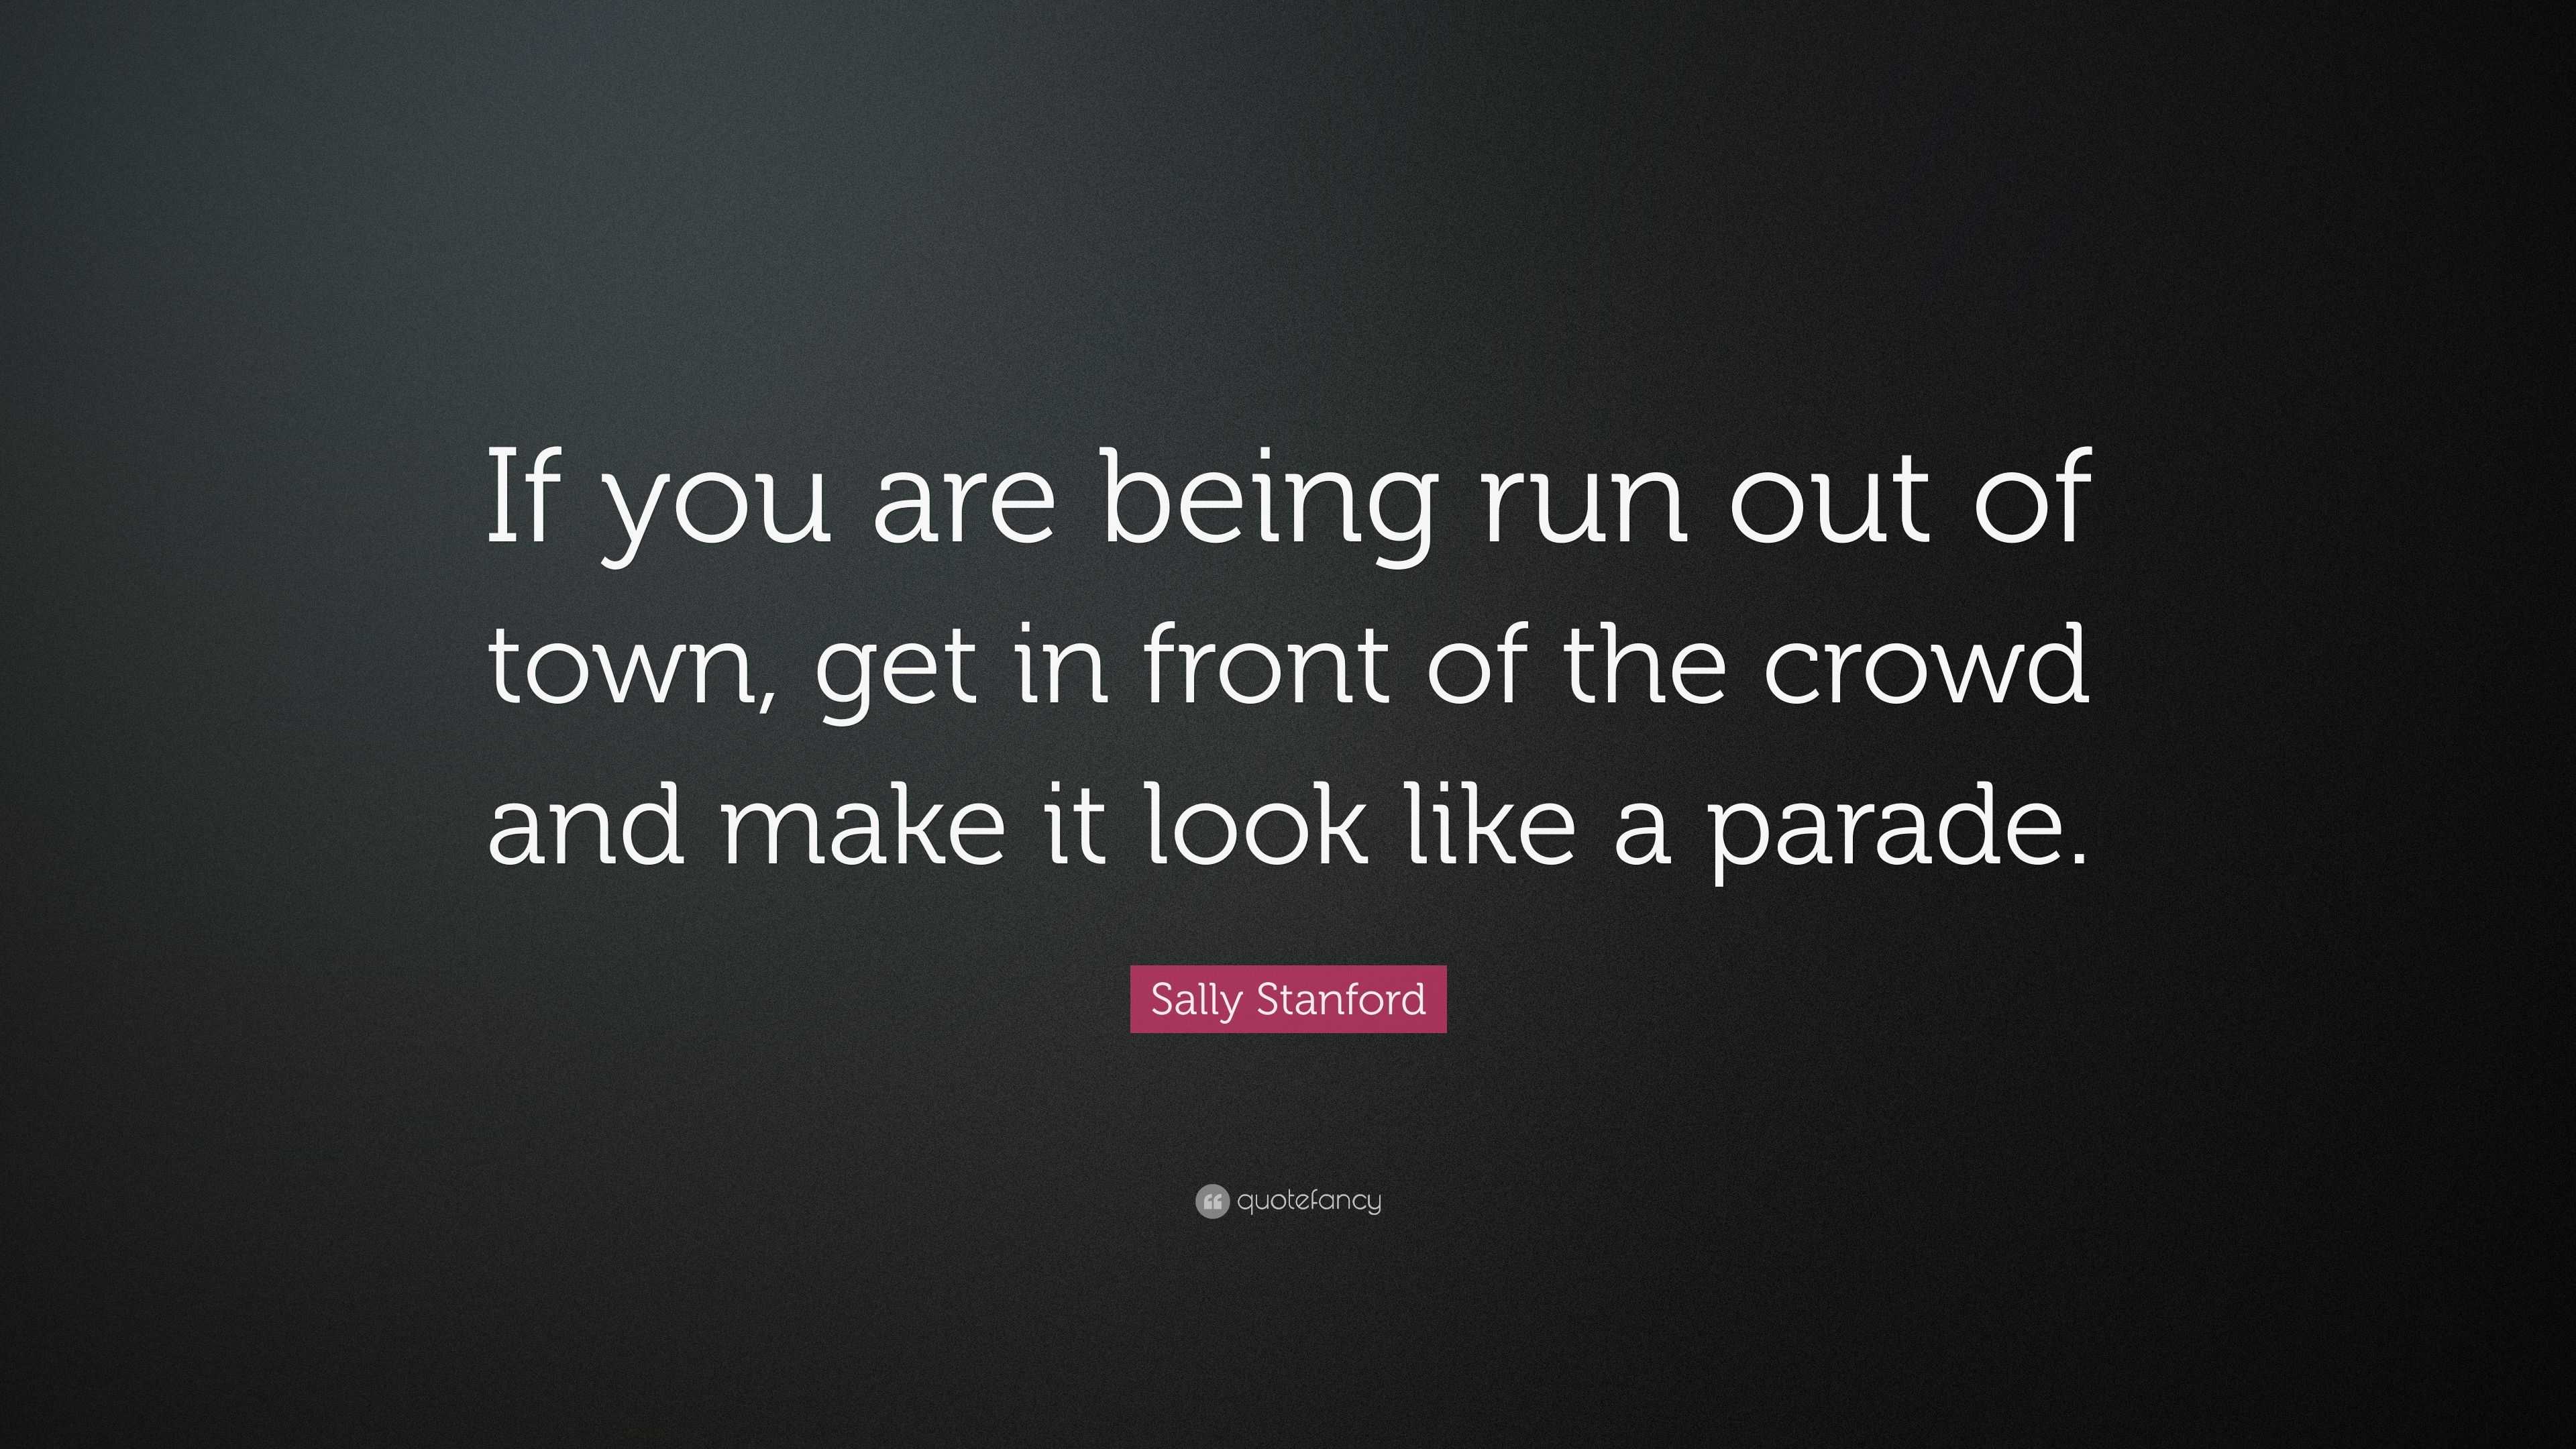 Sally Stanford Quote: “If you are being run out of town, get in front of  the crowd and make it look like a parade.” (12 wallpapers) - Quotefancy